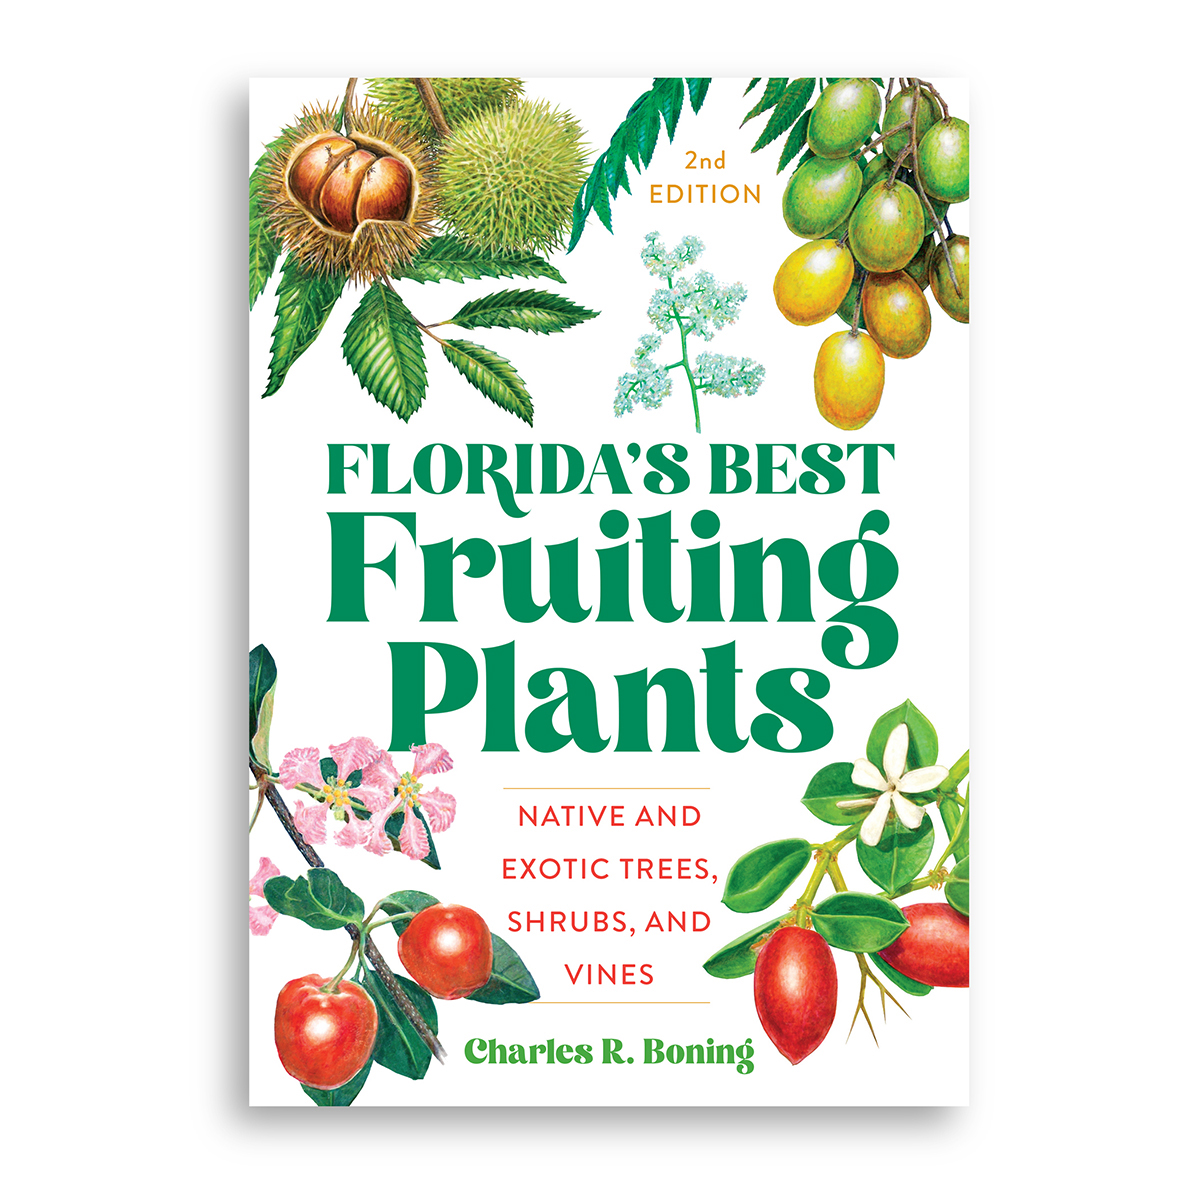 The front cover design of Florida's Best Fruiting Plants: Native and Exotic Trees, Shrubs, and Vines by Charles R. Boning, 2nd edition, cover design by Jen Huppert Design.